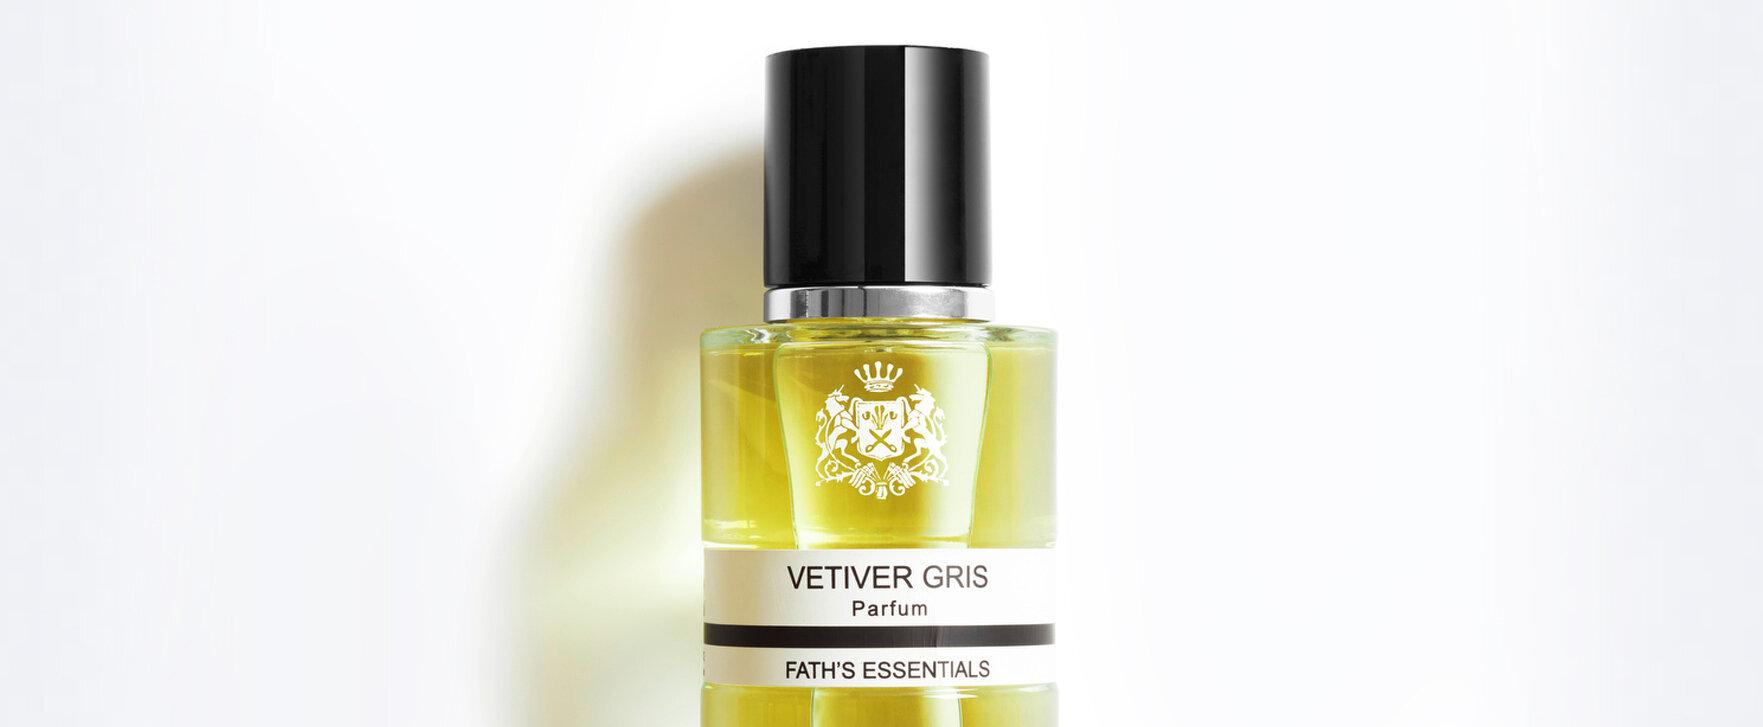 “Fath’s Essentials - Vetiver Gris”: The New Unisex Fragrance With Unconventional Notes